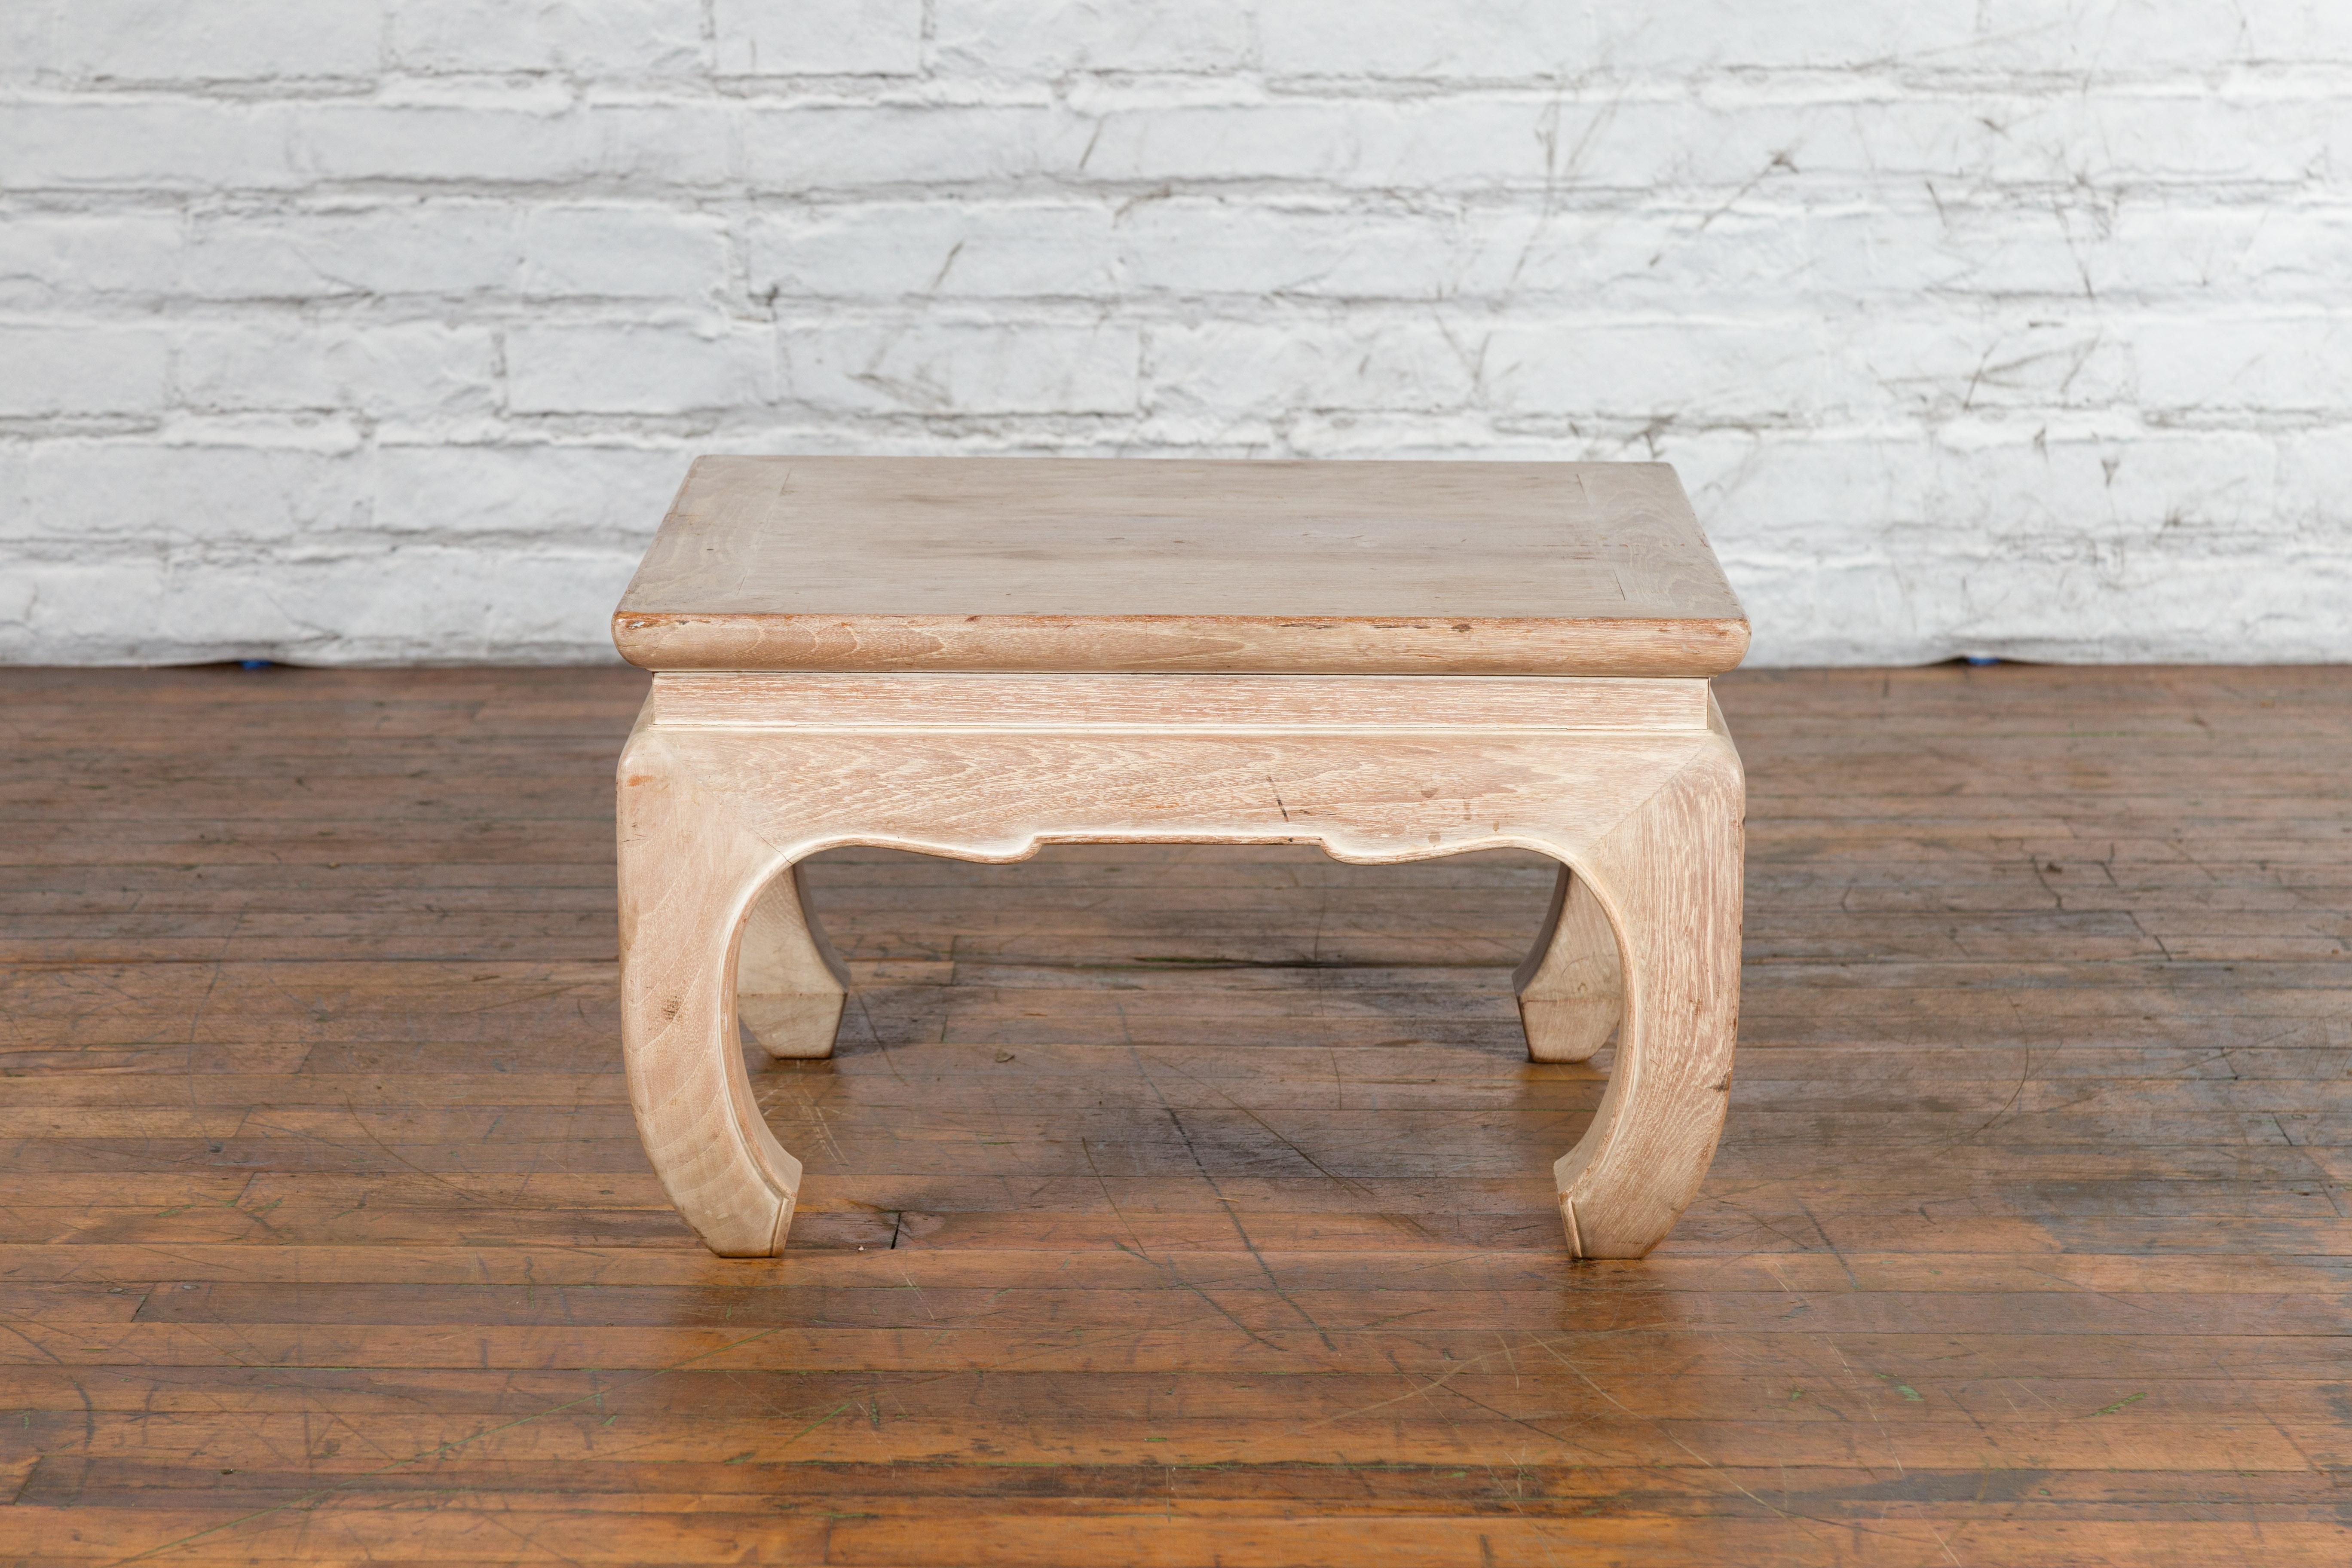 A small vintage Thai whitewashed low drinks table from the mid 20th century, with waisted apron, carved accents and chow legs. Created in Thailand during the Midcentury period, this vintage wooden low drinks table features a square top with central